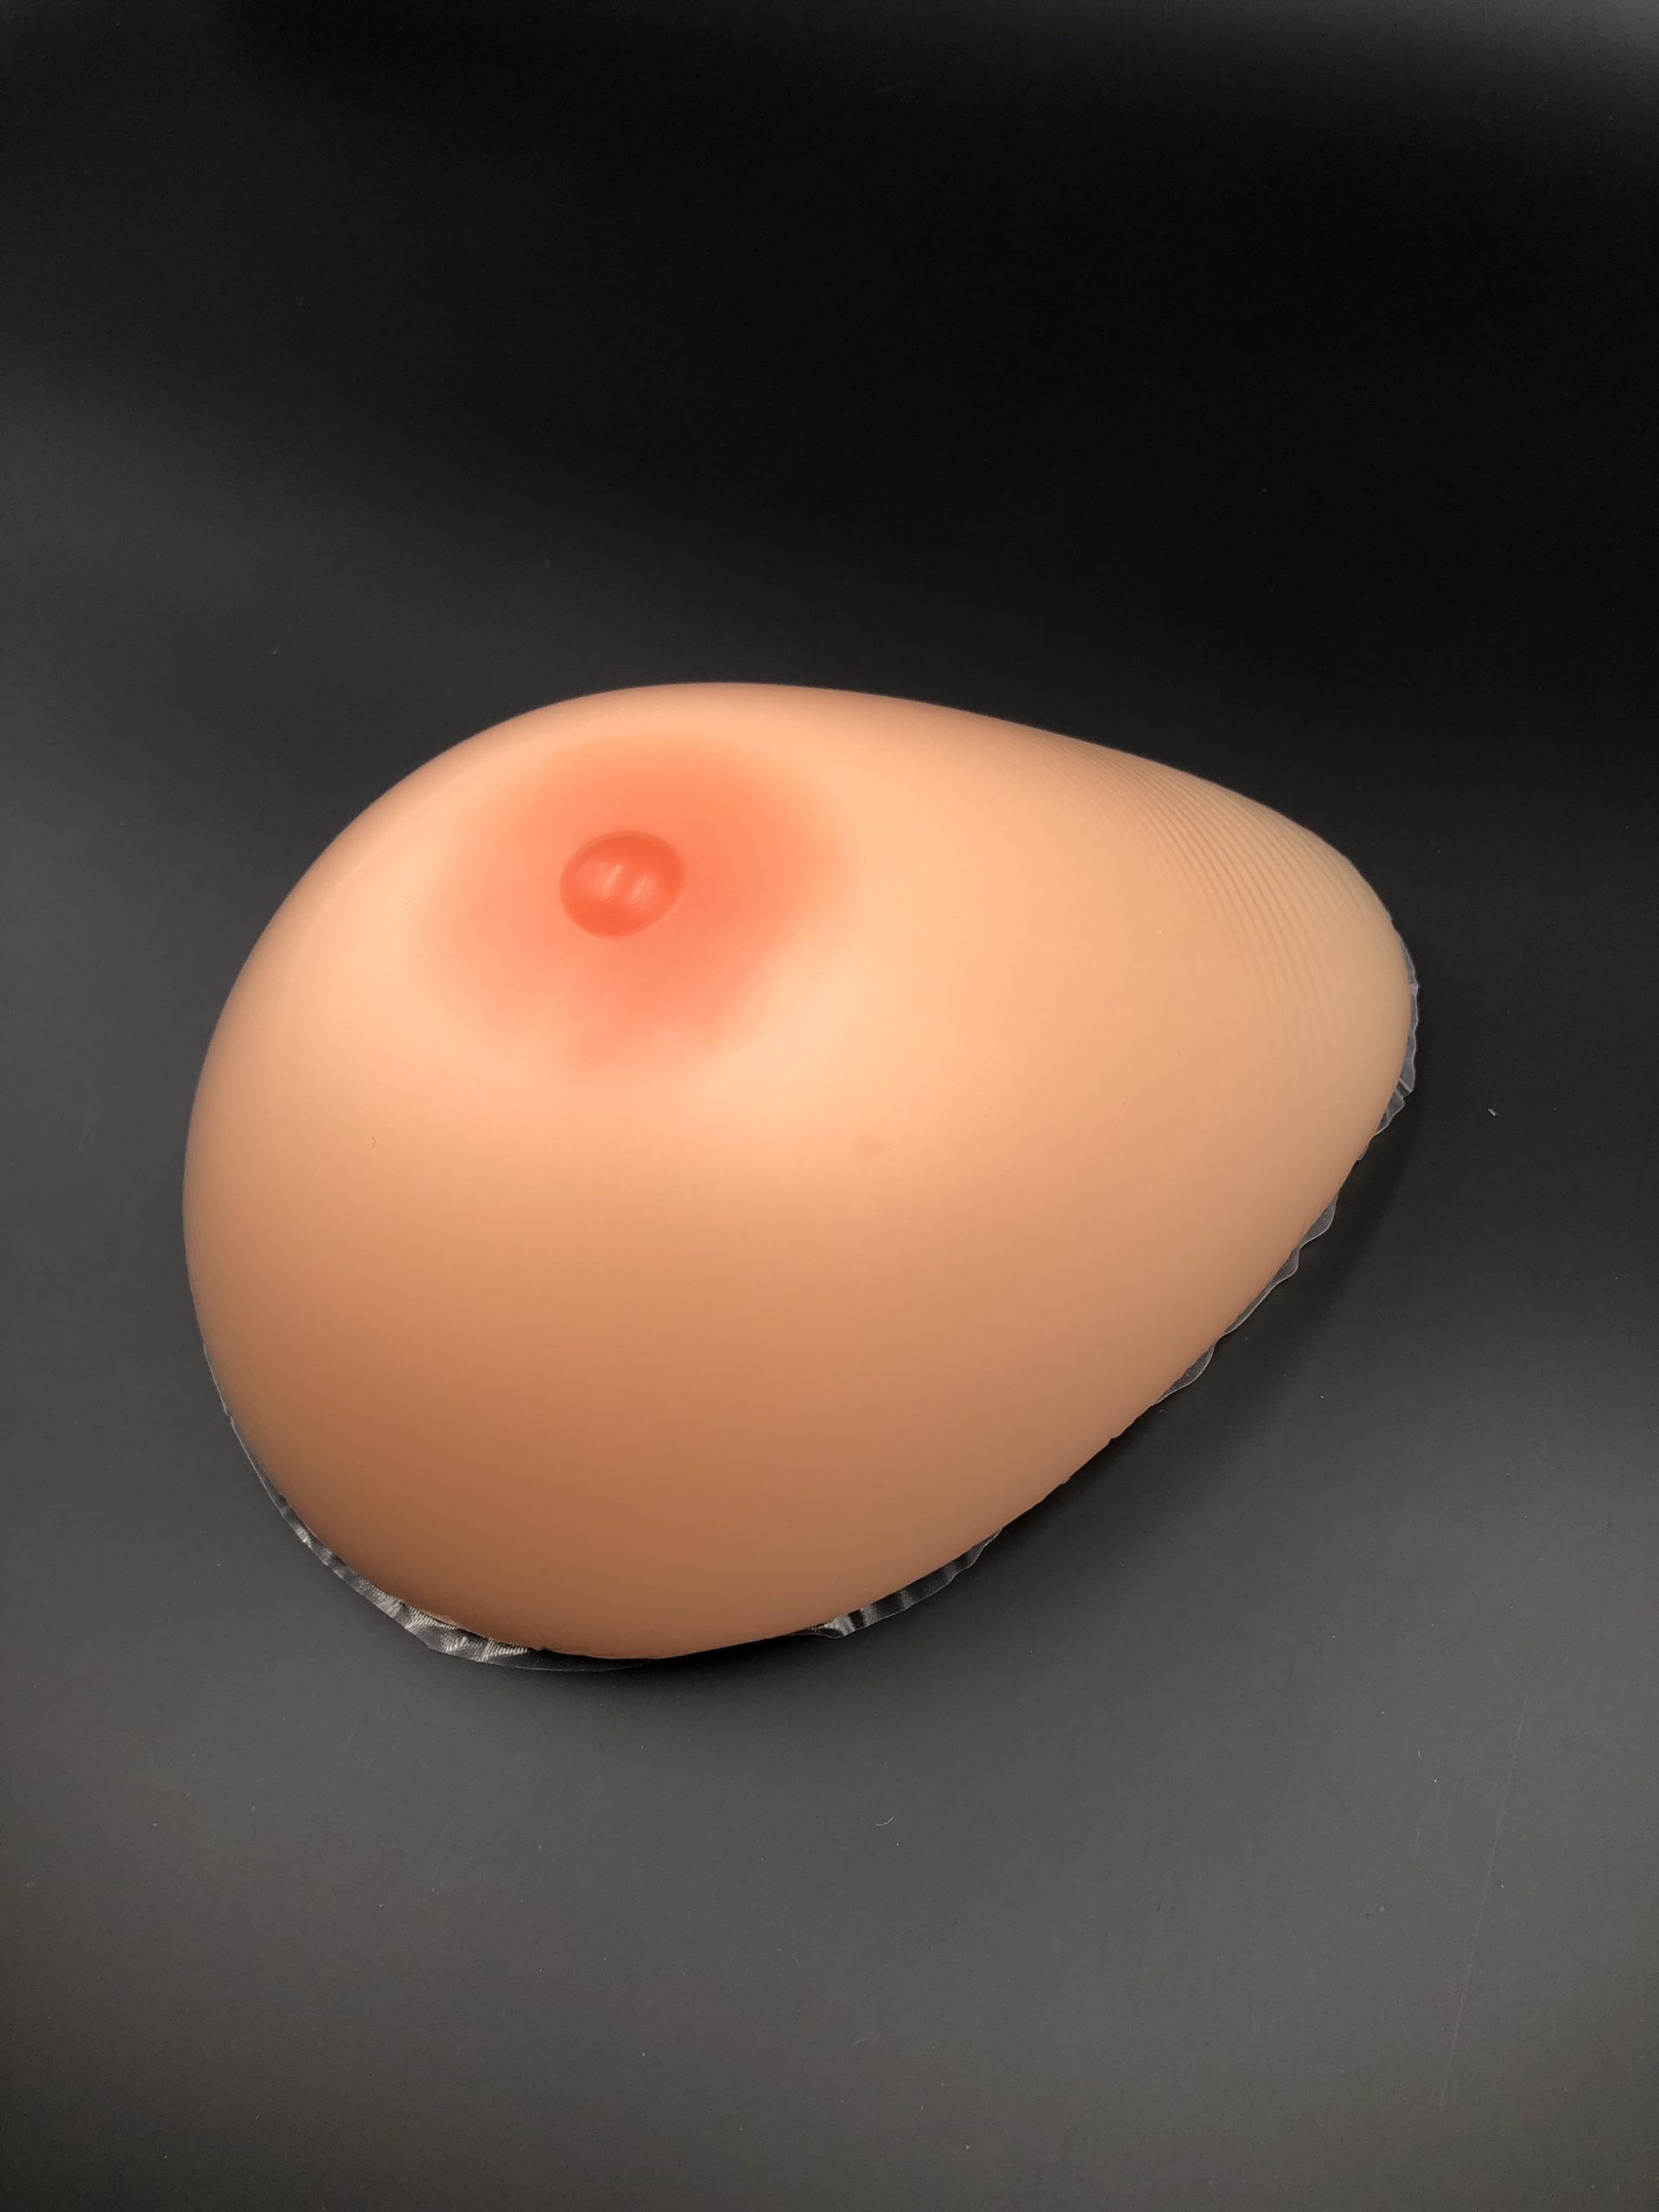 How To Apply Breast Forms